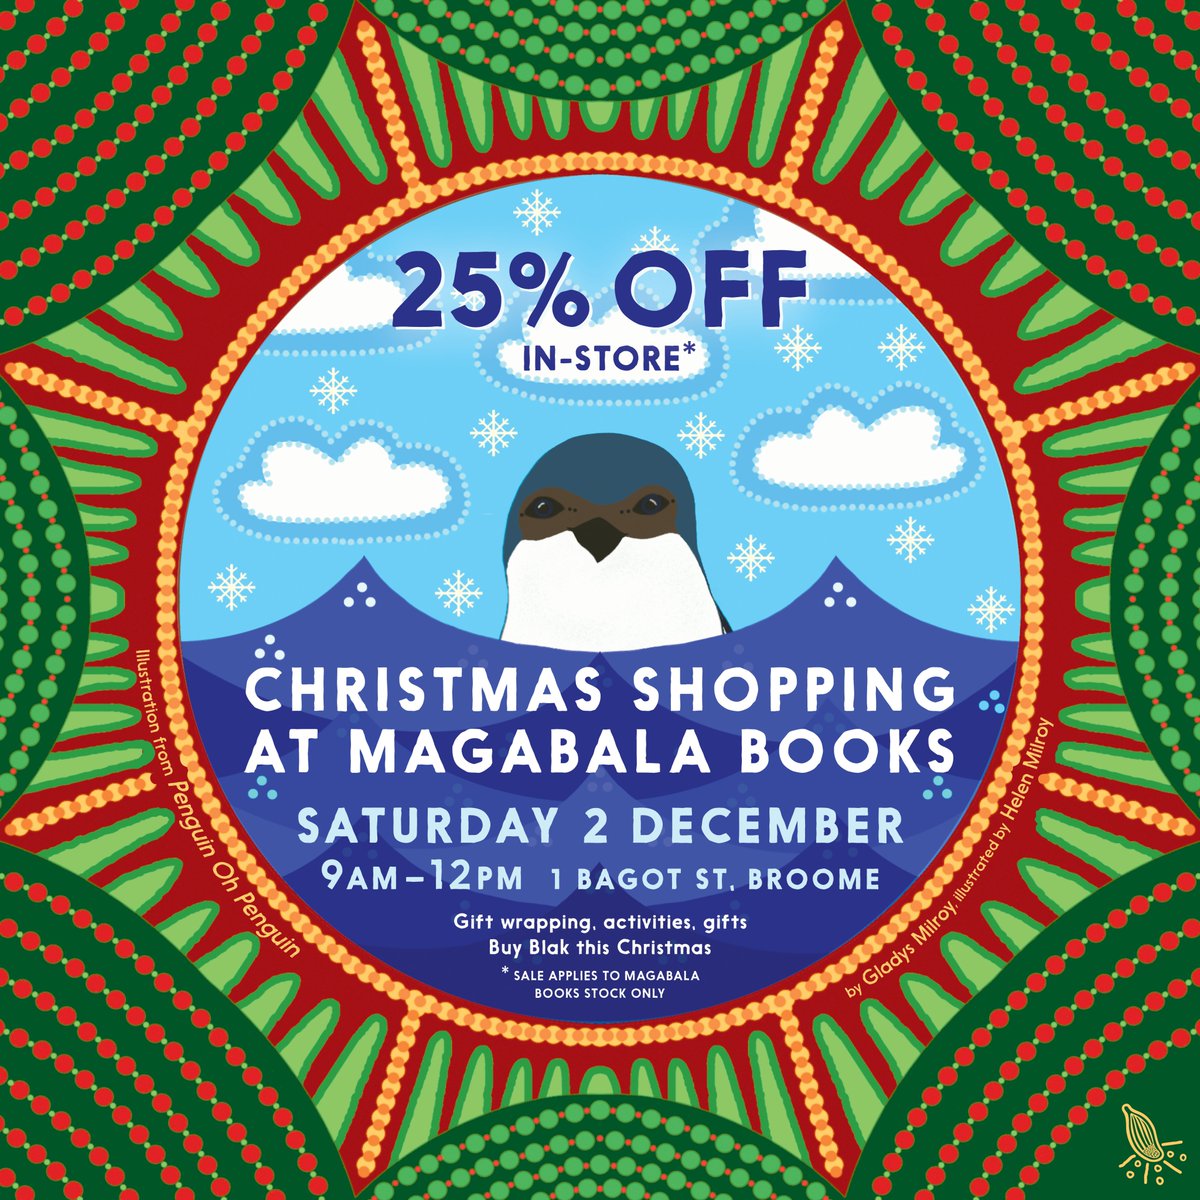 🎄Get into the festive spirit at Magabala's Christmas shopping event in Rubibi (Broome)! 🎅🏾